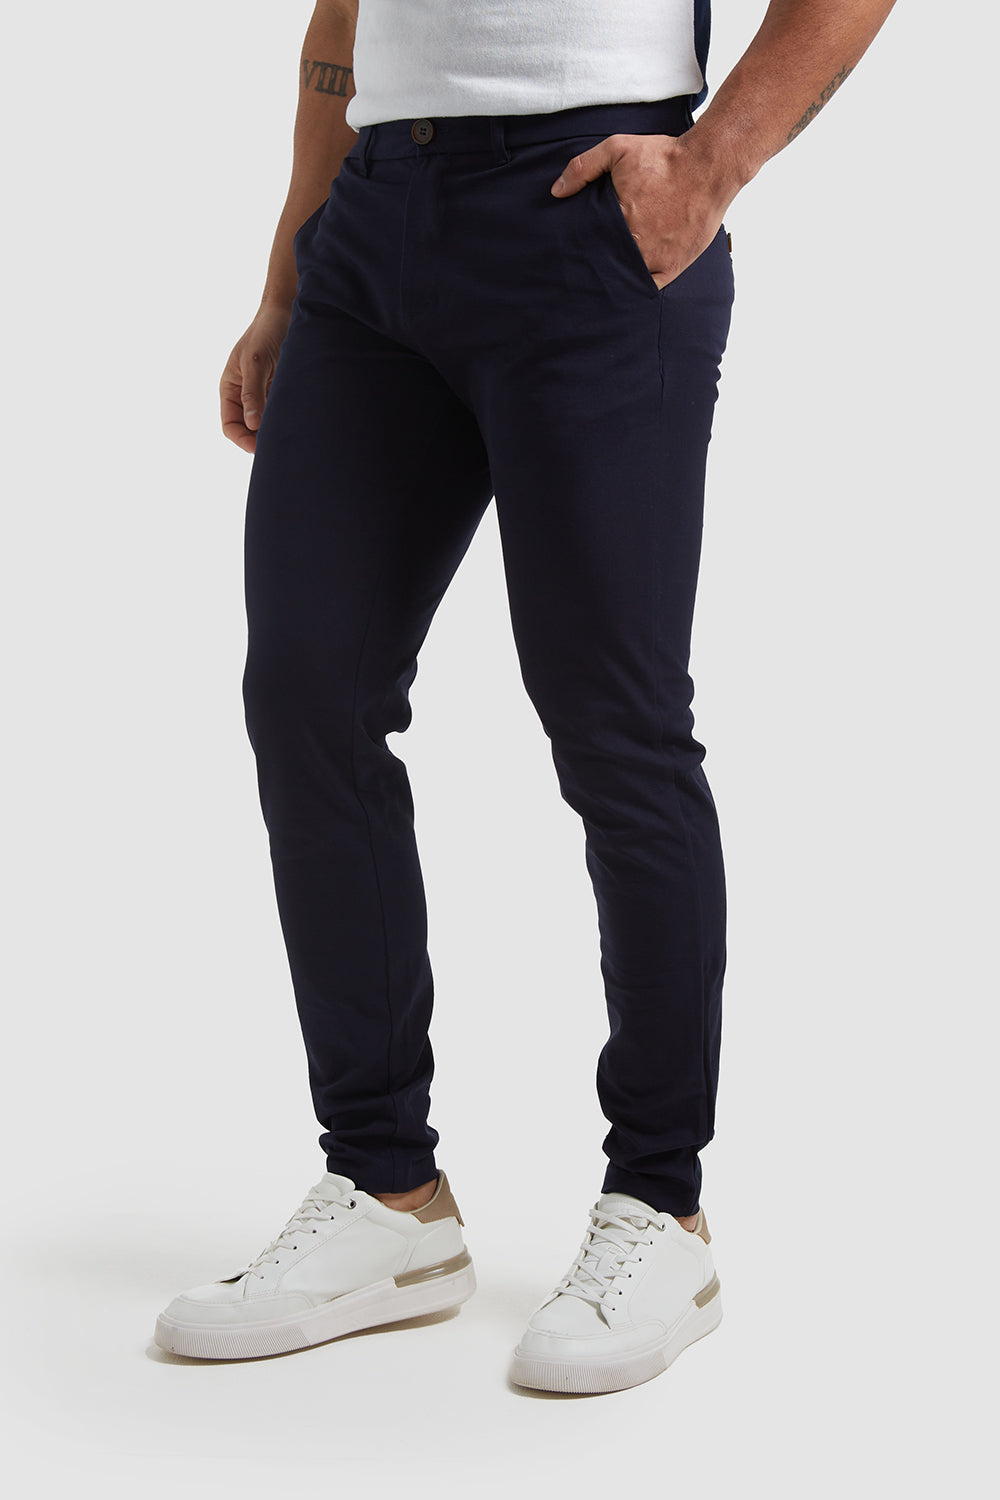 Buy Navy Blue Straight Belted Soft Touch Chino Trousers from the Next UK  online shop